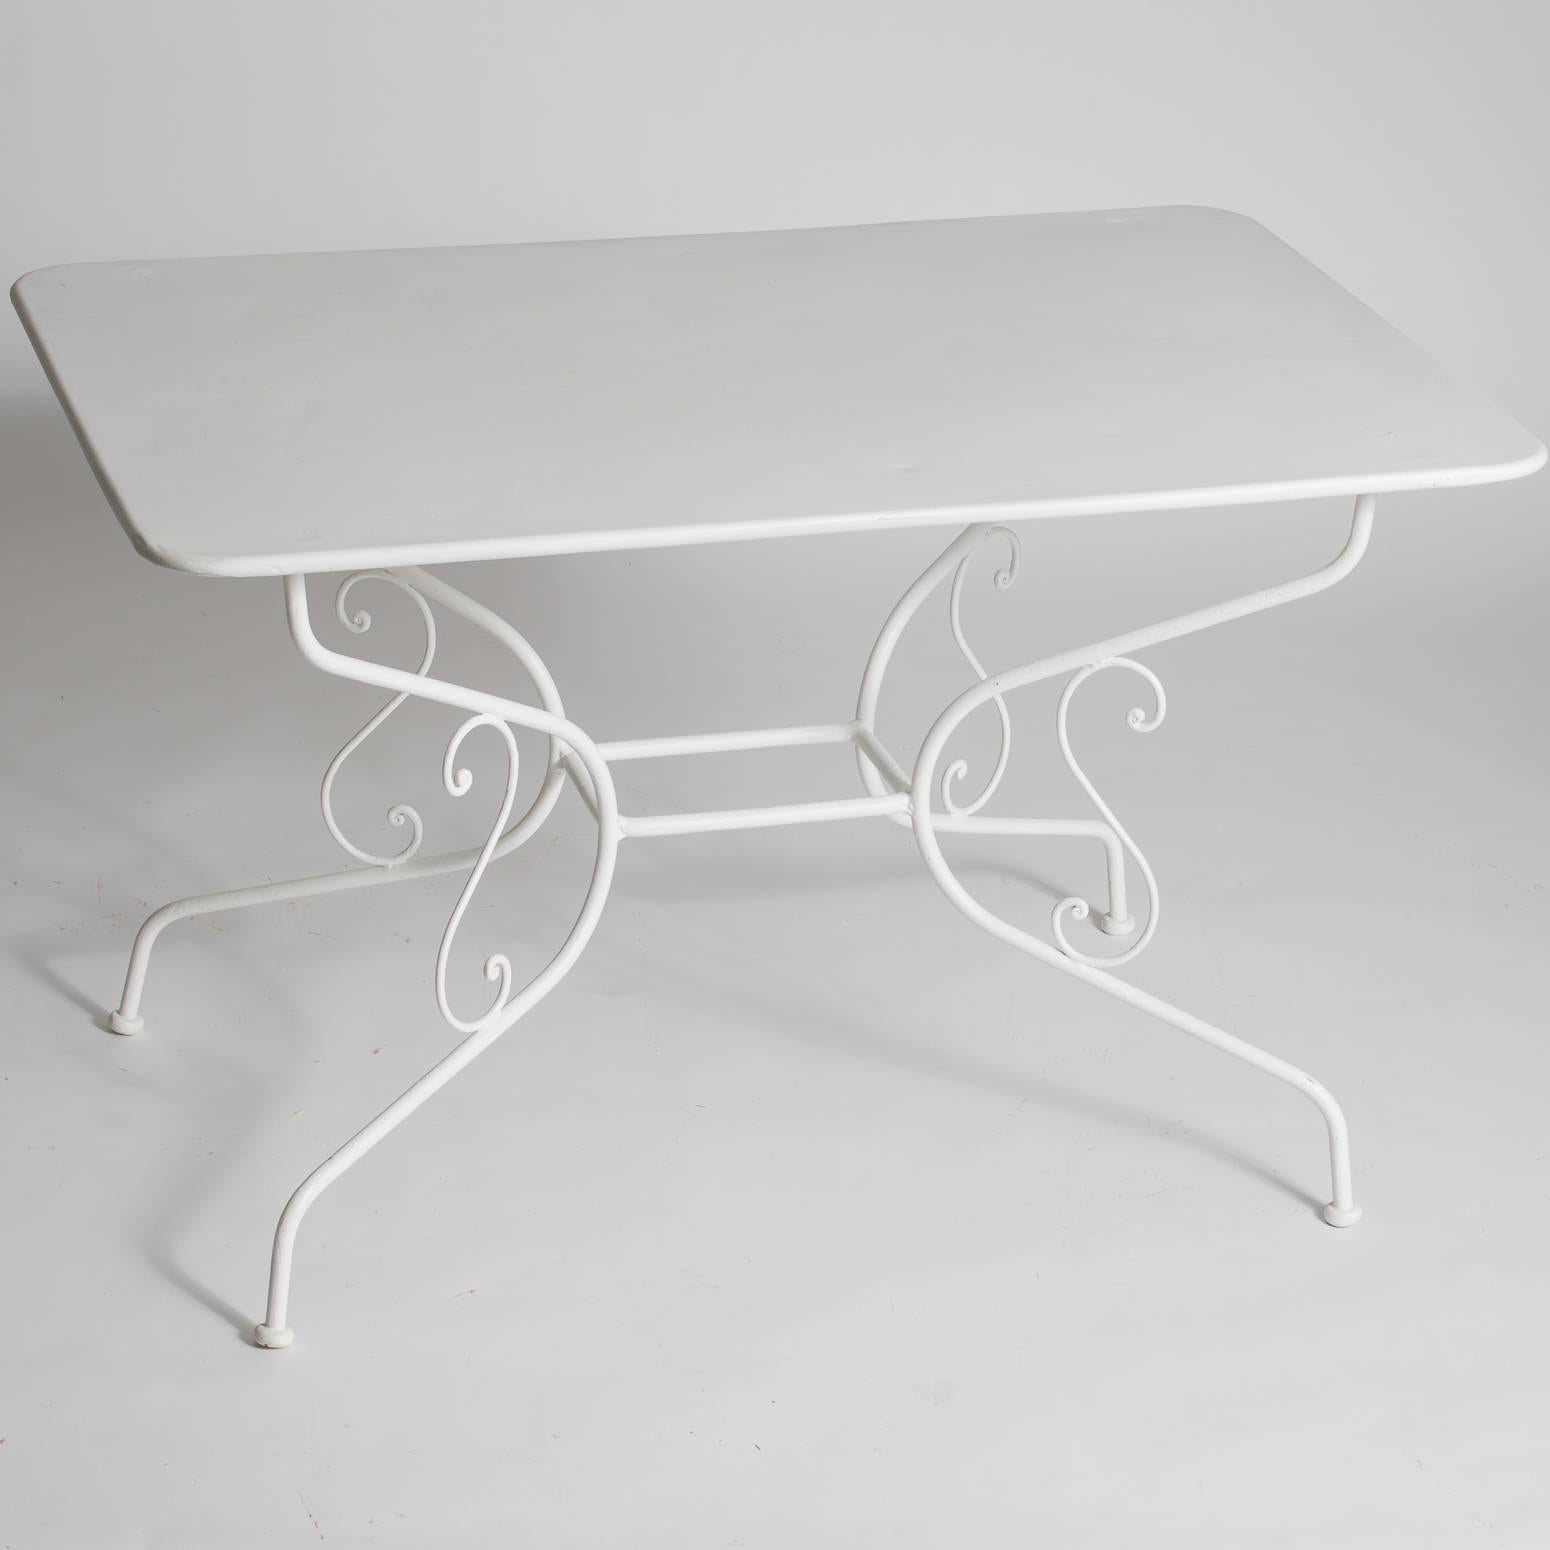 A perfect size for dining, this rectangular table can easily fit six people. It has a beautiful scrolled base with an intricate design. It has recently been repainted with white outdoor weather-proof paint.
 
$3,200.
Measures: 28.5″ high,
46.5”